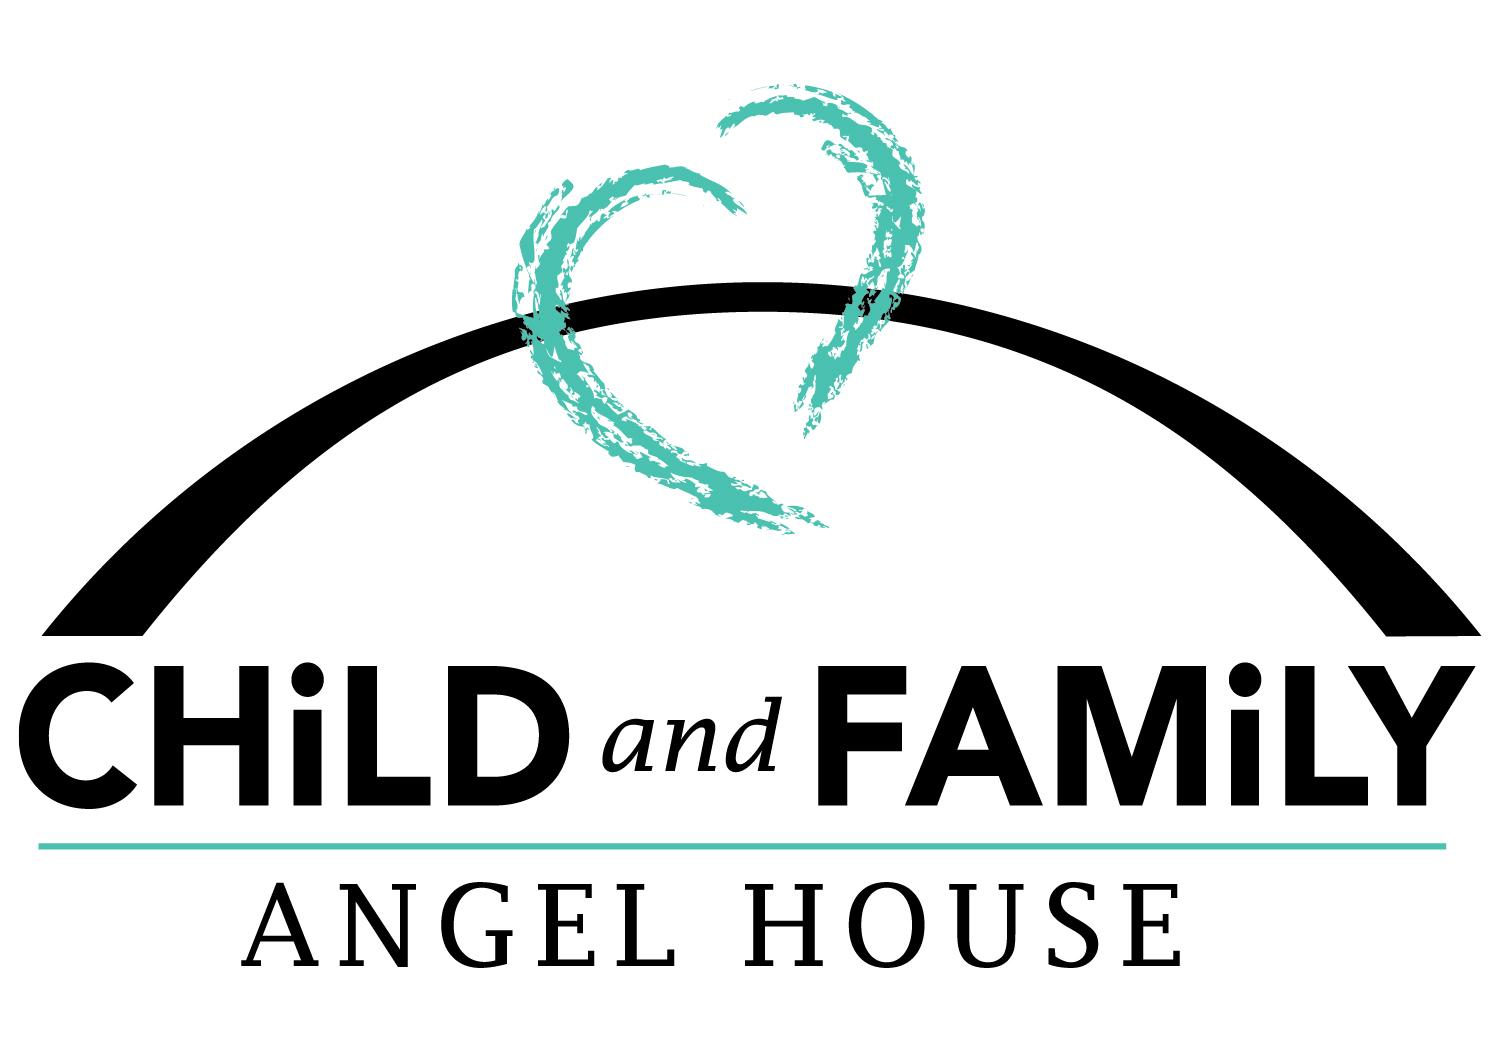 child and family charities angel house logo